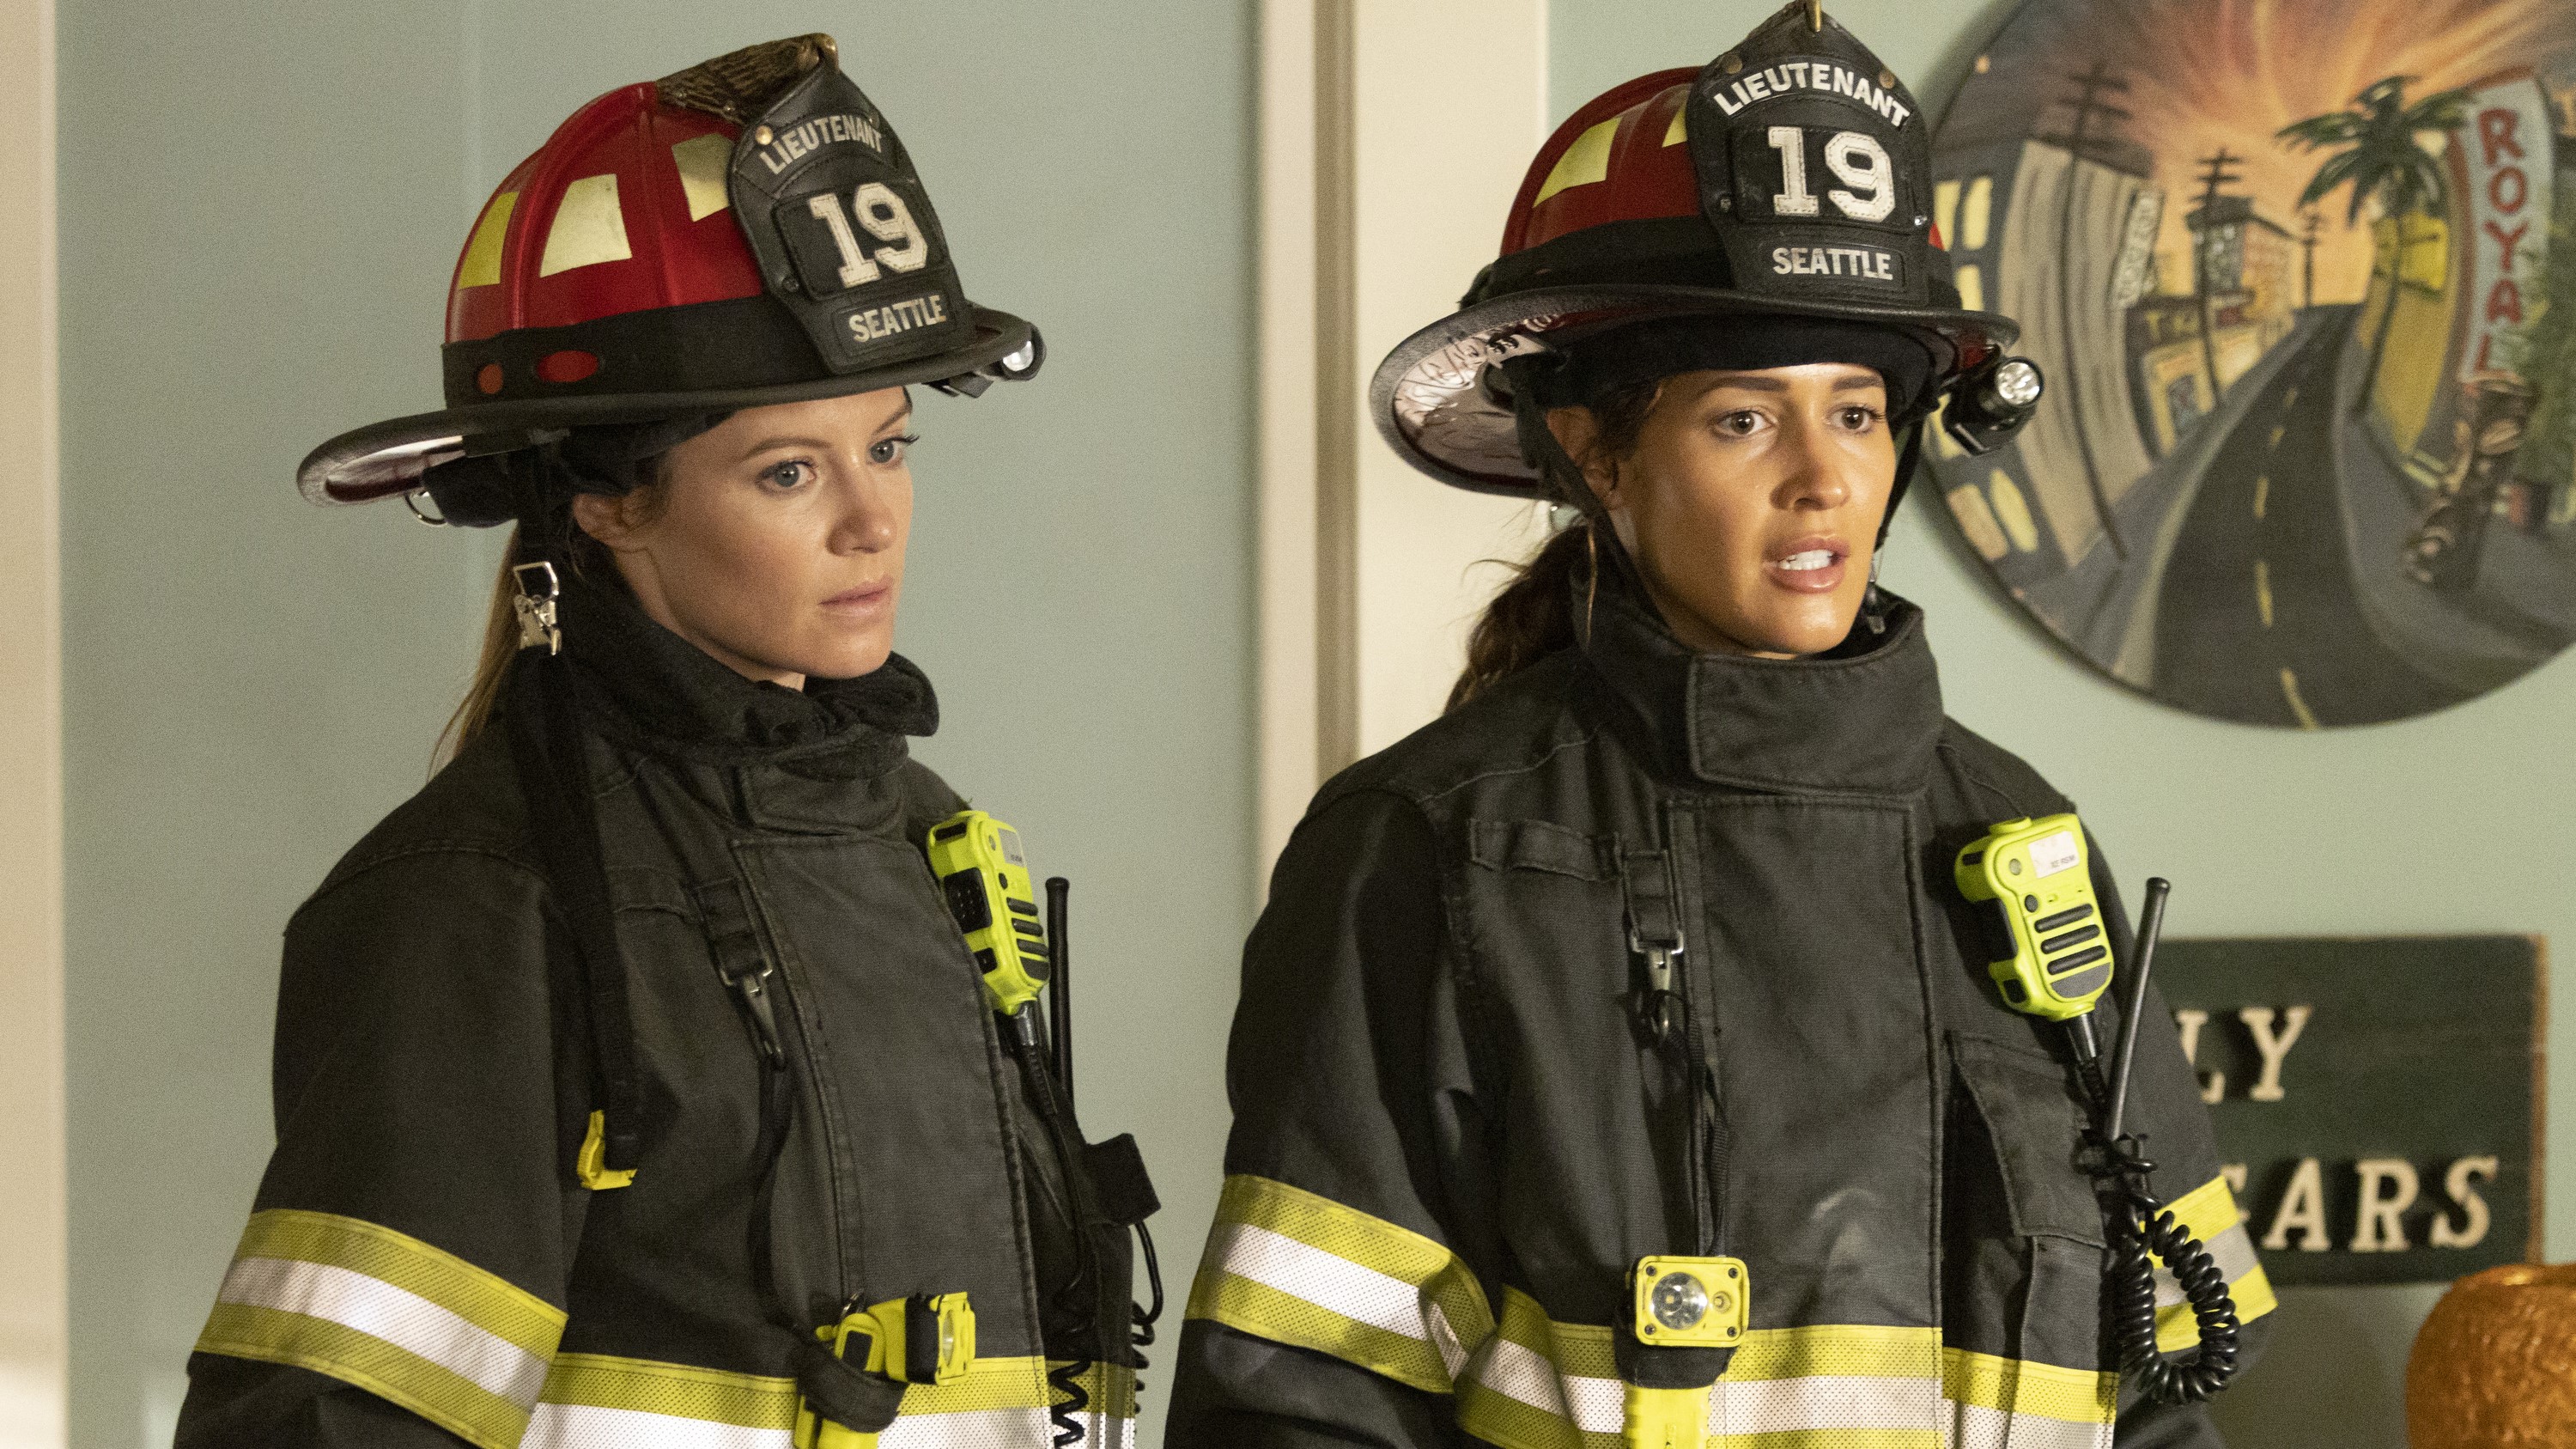 Station 19 season 7: everything we know about the drama | What to Watch